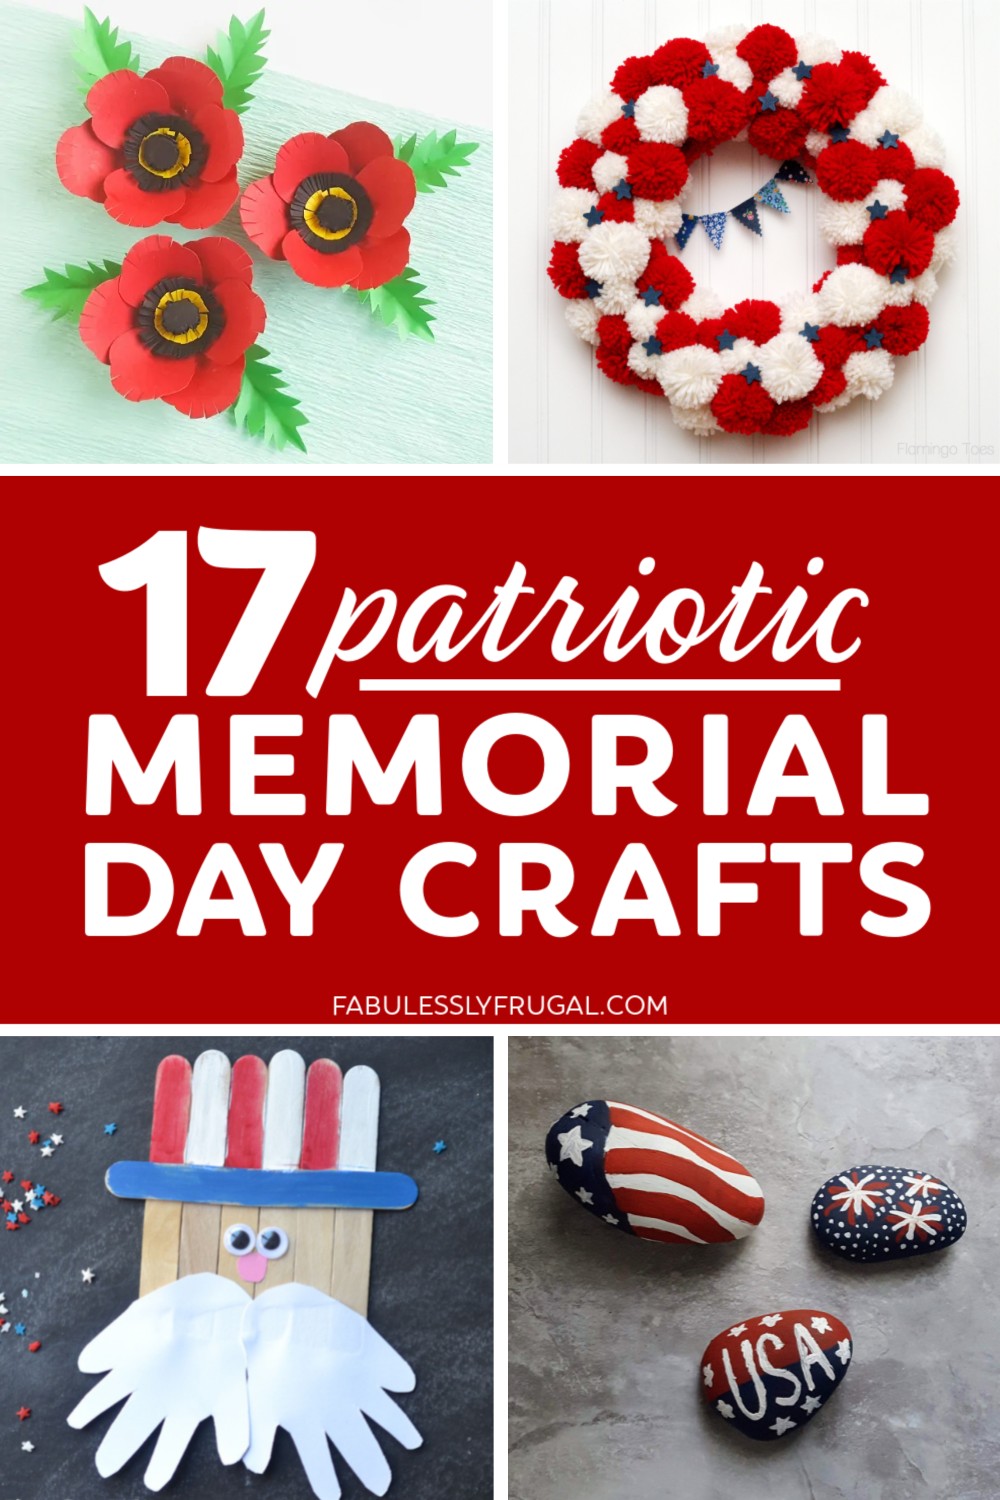 Memorial day crafts